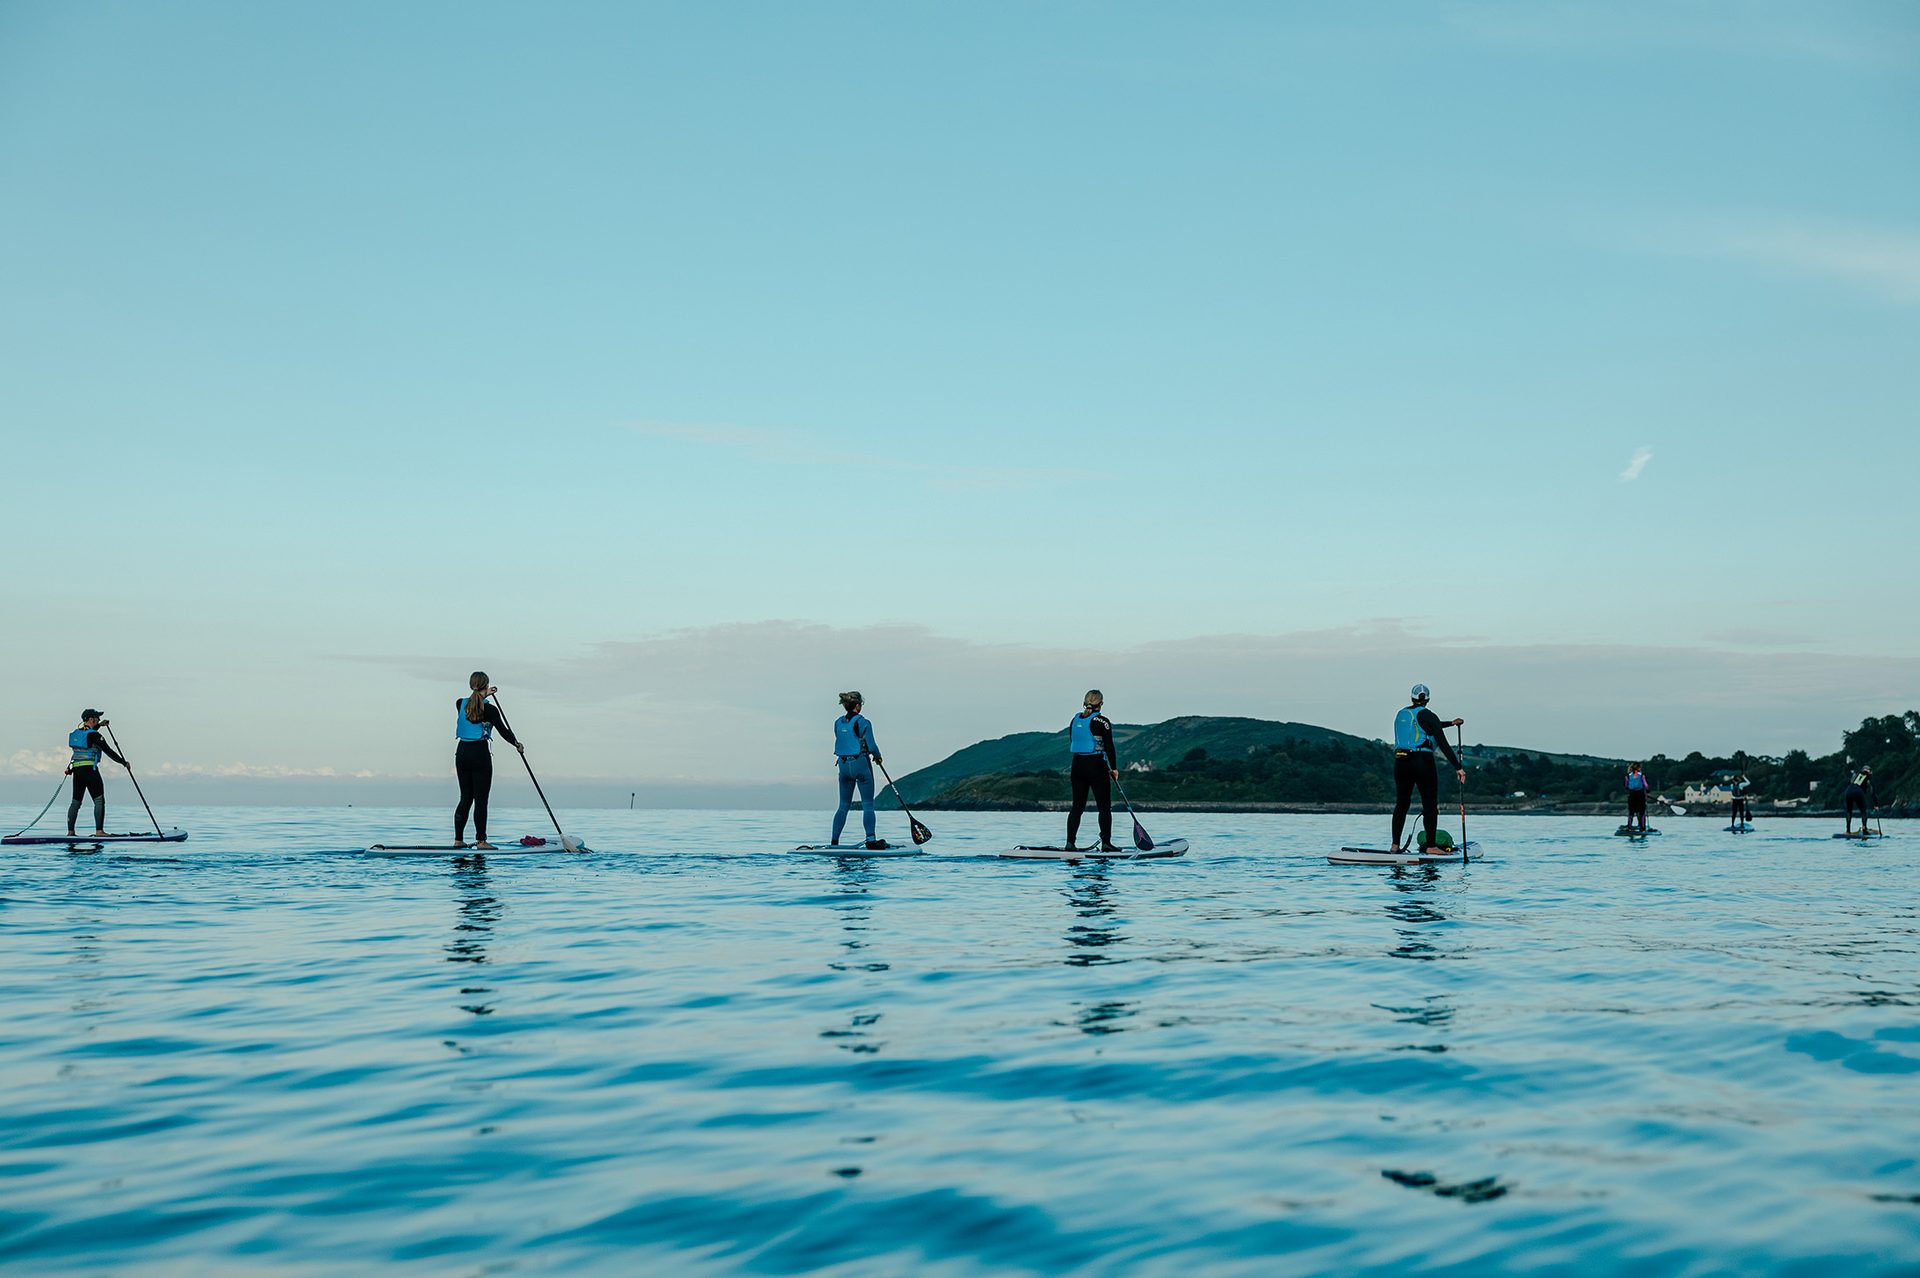 Coastal and oceanic landforms, Sports equipment, Water, Sky, Surfing, Surfboard